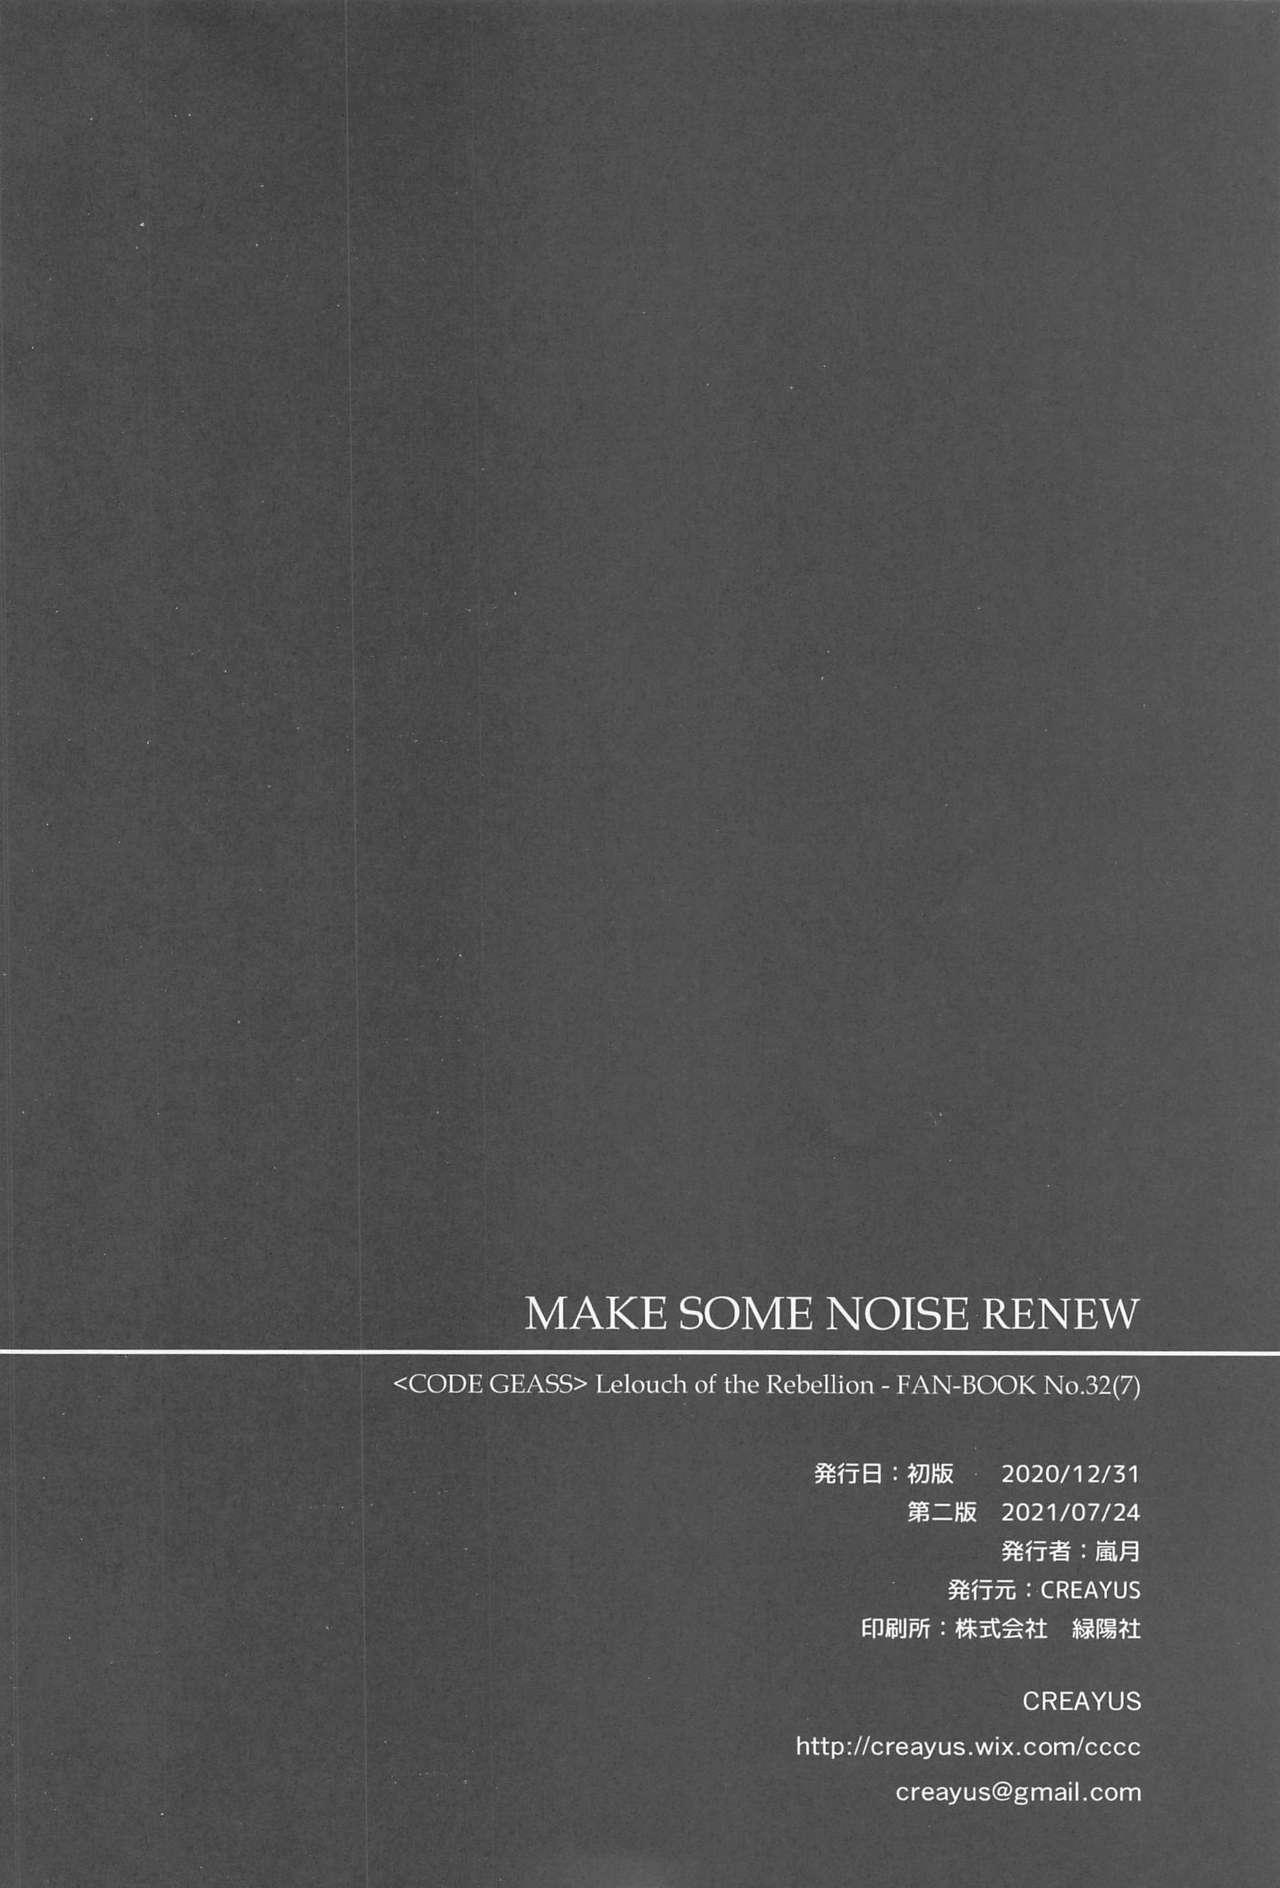 Screaming MAKE SOME NOISE RENEW - Code geass Dominant - Page 137